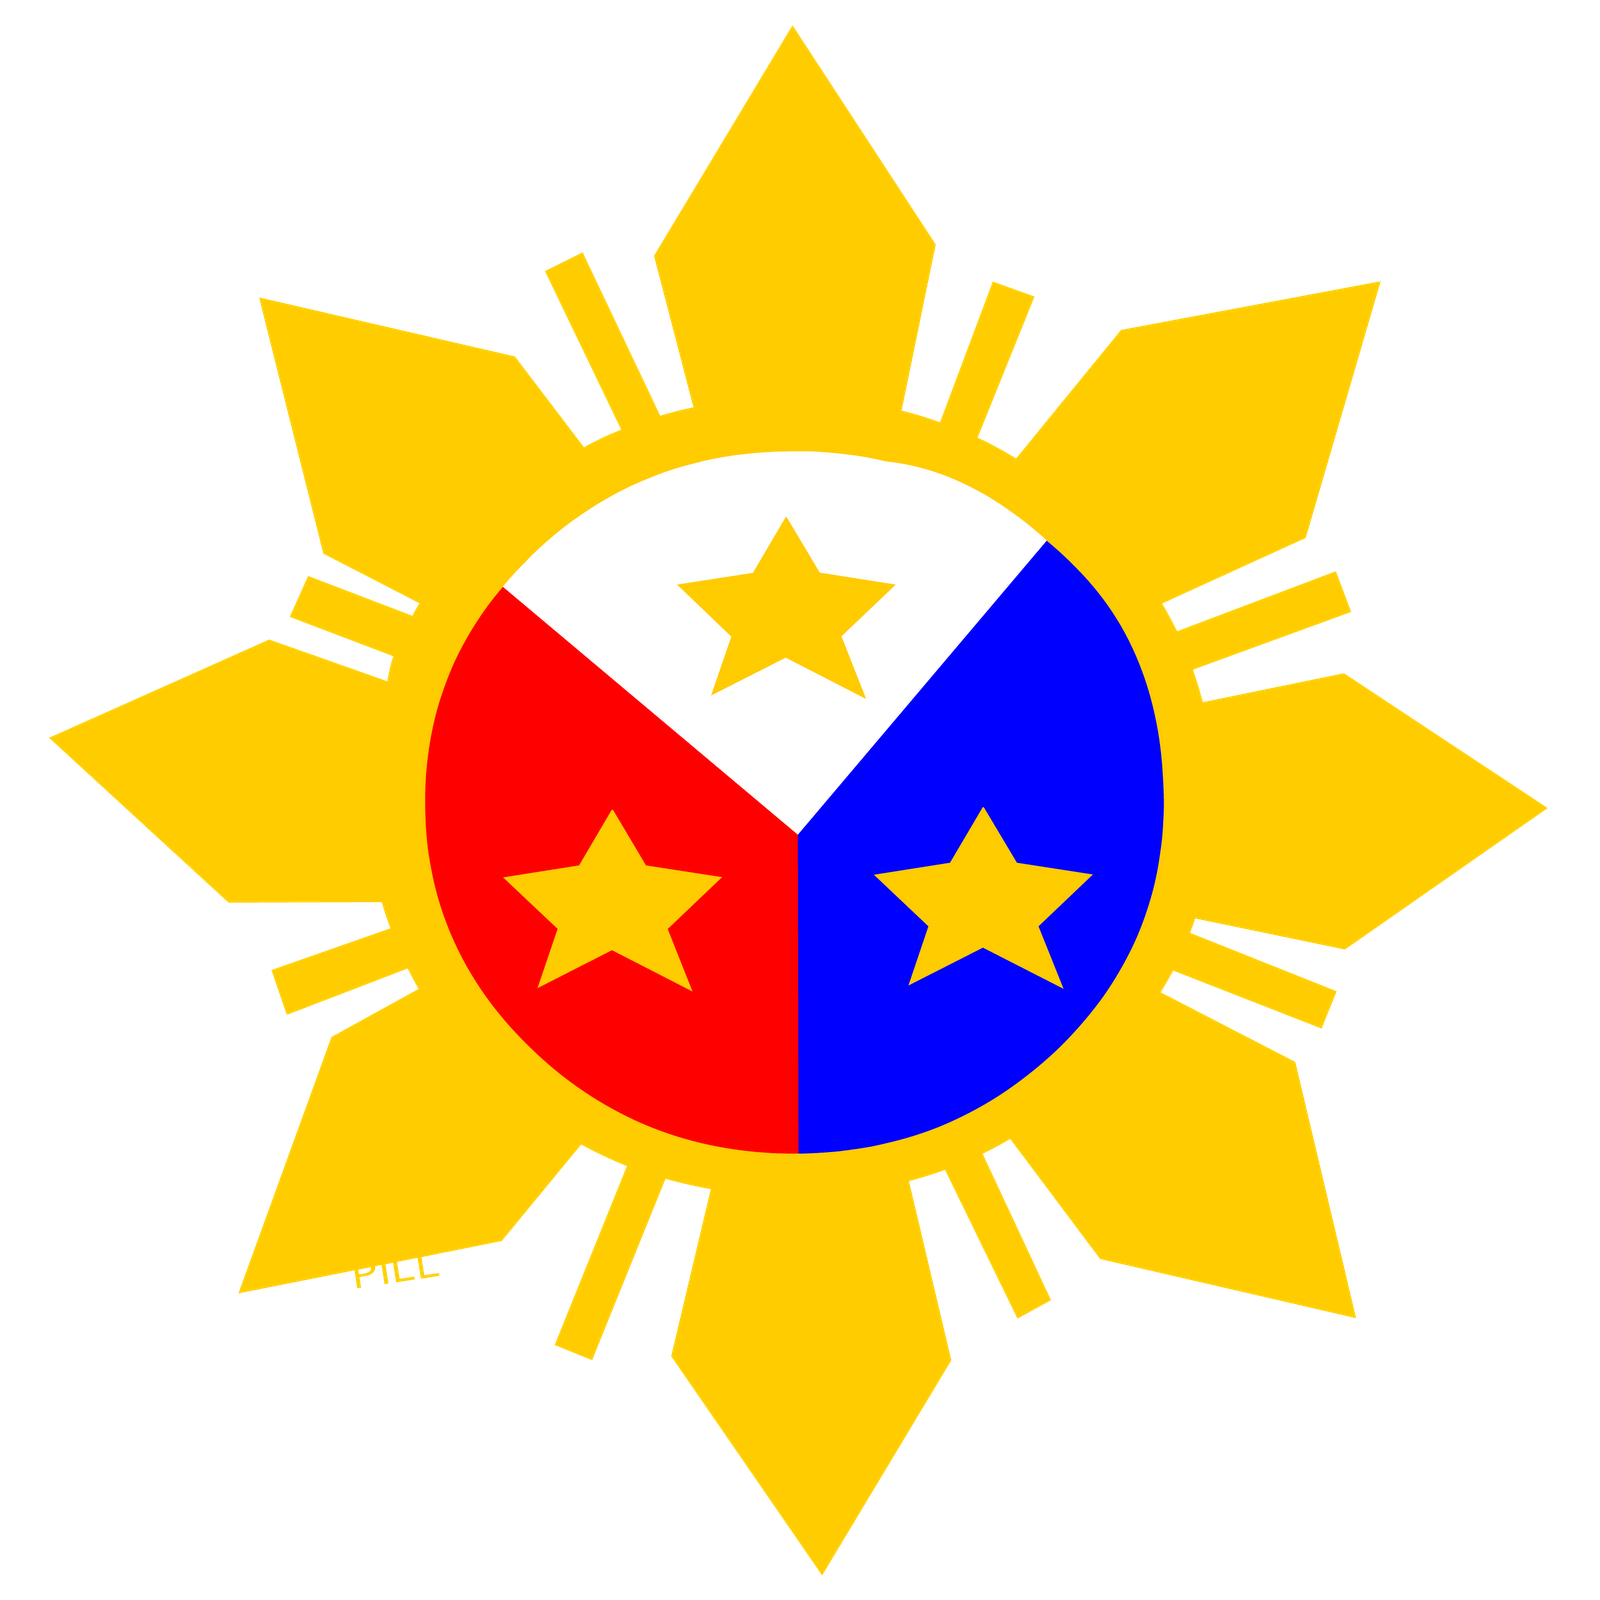 Filipino Flag Images   Clipart Best